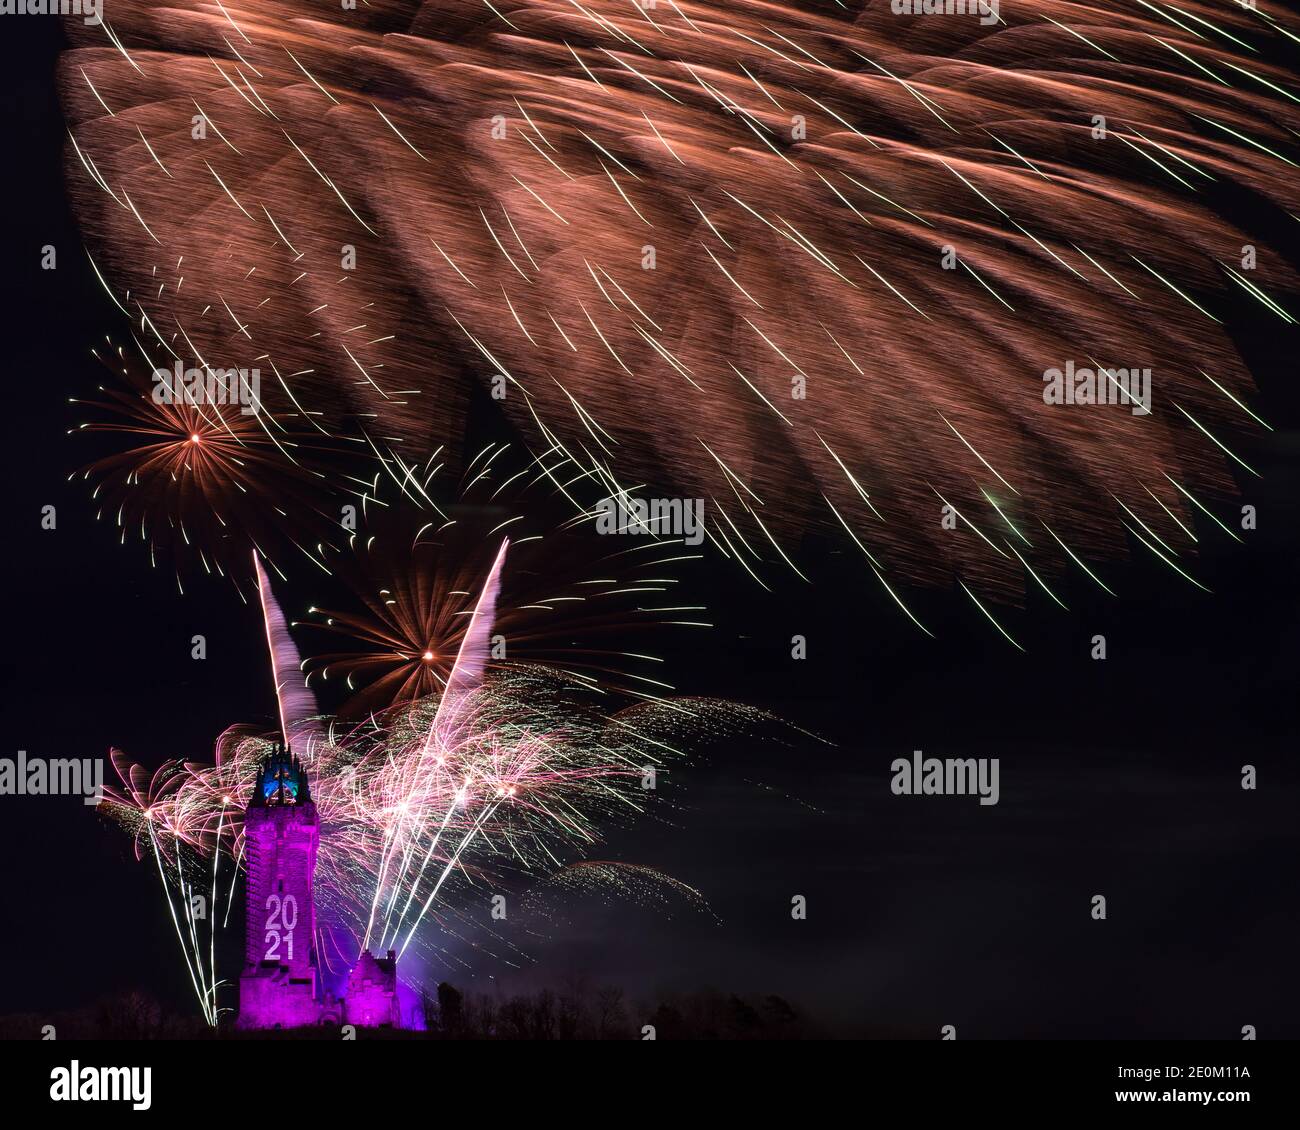 Stirling, Scotland, UK. 1 January 2021. Pictured: Hogmanay pyrotechnic spectacular closes off 2020 and brings in 2021 with a bang as colourful explosions burst lighting up the new year night sky 600feet above the Wallace Monument in Stirling. Due to the coronavirus (COVID19) pandemic the show will be live streamed on TV and online since Scotland is in phase 4 lockdown. Edinburgh based events company, 21CC Events Ltd, pyrotechnic specialists have spent the last few days setting up the show including powerful projection lights for the monuments facade. Credit: Colin Fisher/Alamy Live News. Stock Photo